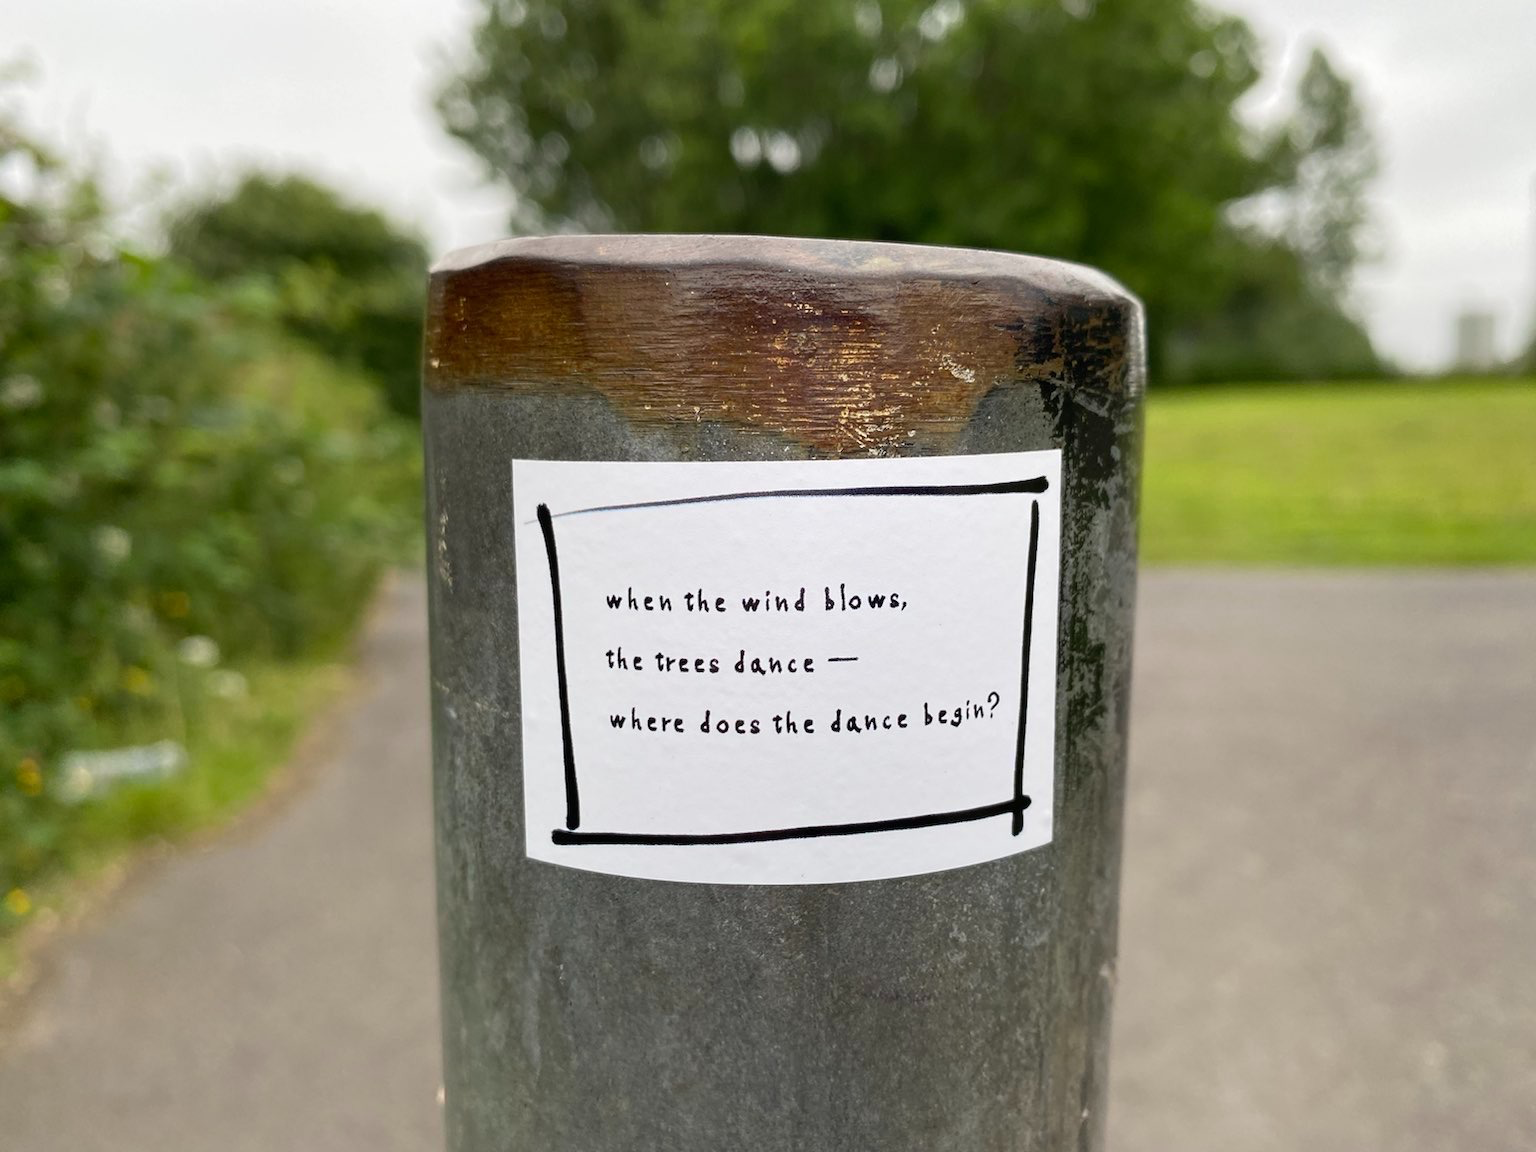 sticker on post in park with the words "when the wind blows, the trees dance — where does the dance begin?"